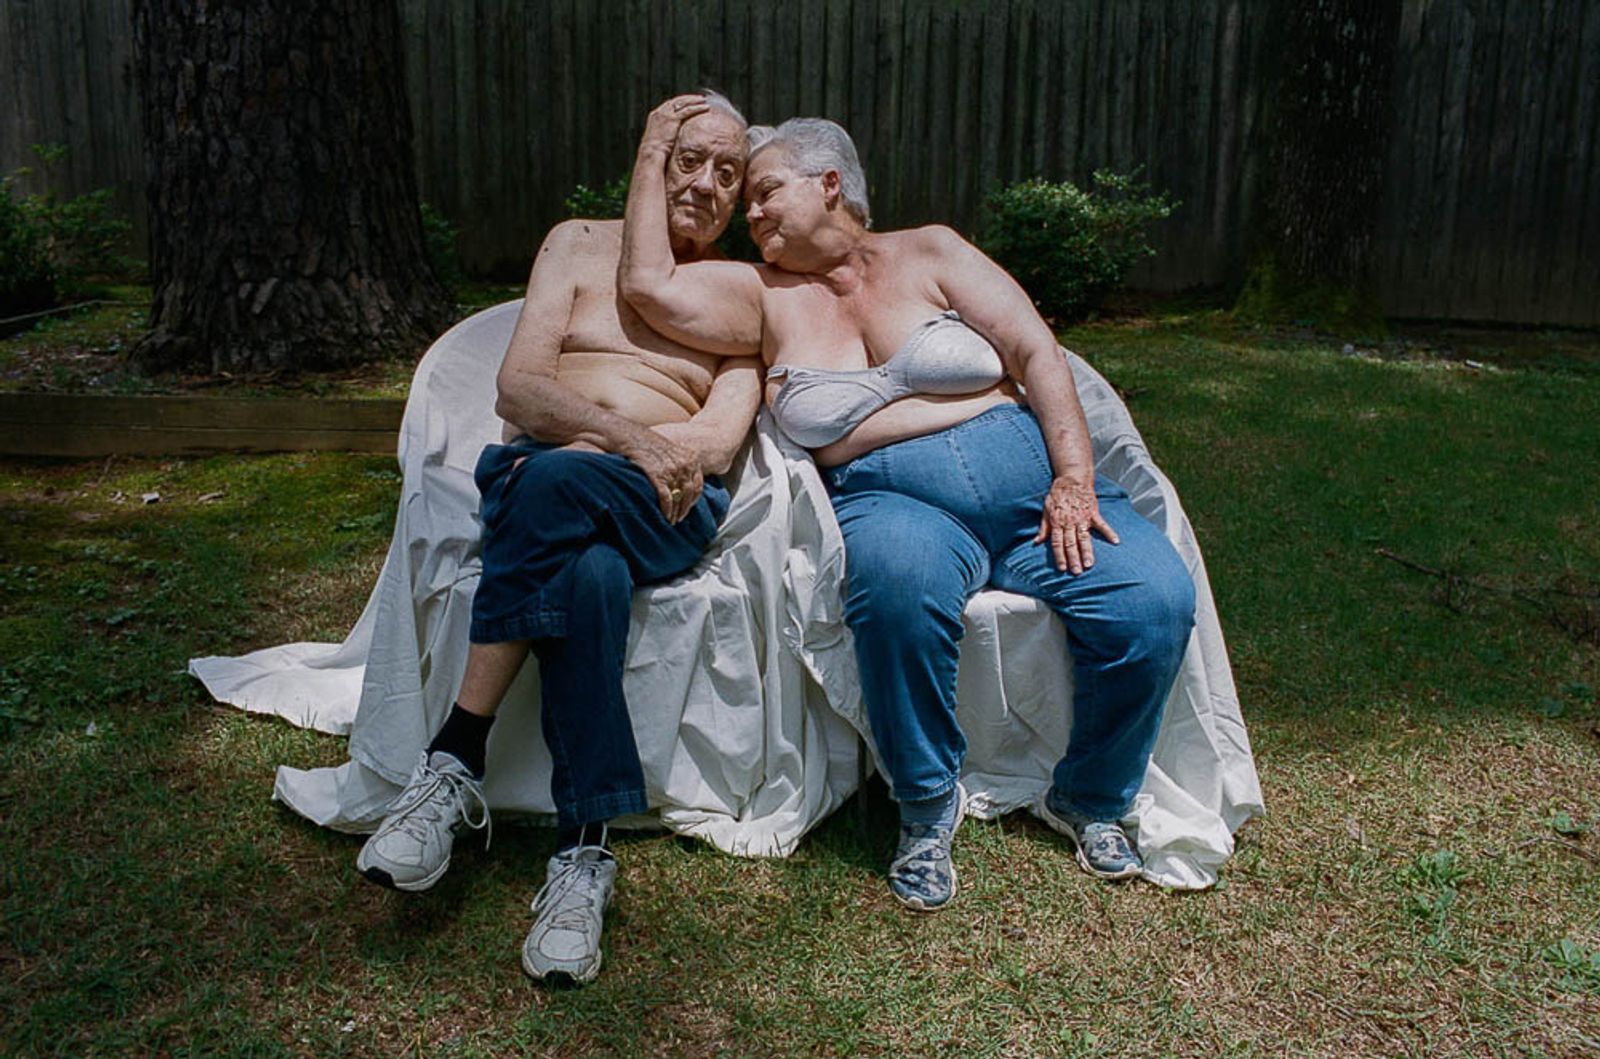 © Liz Sanders - Image from the Once a Father photography project